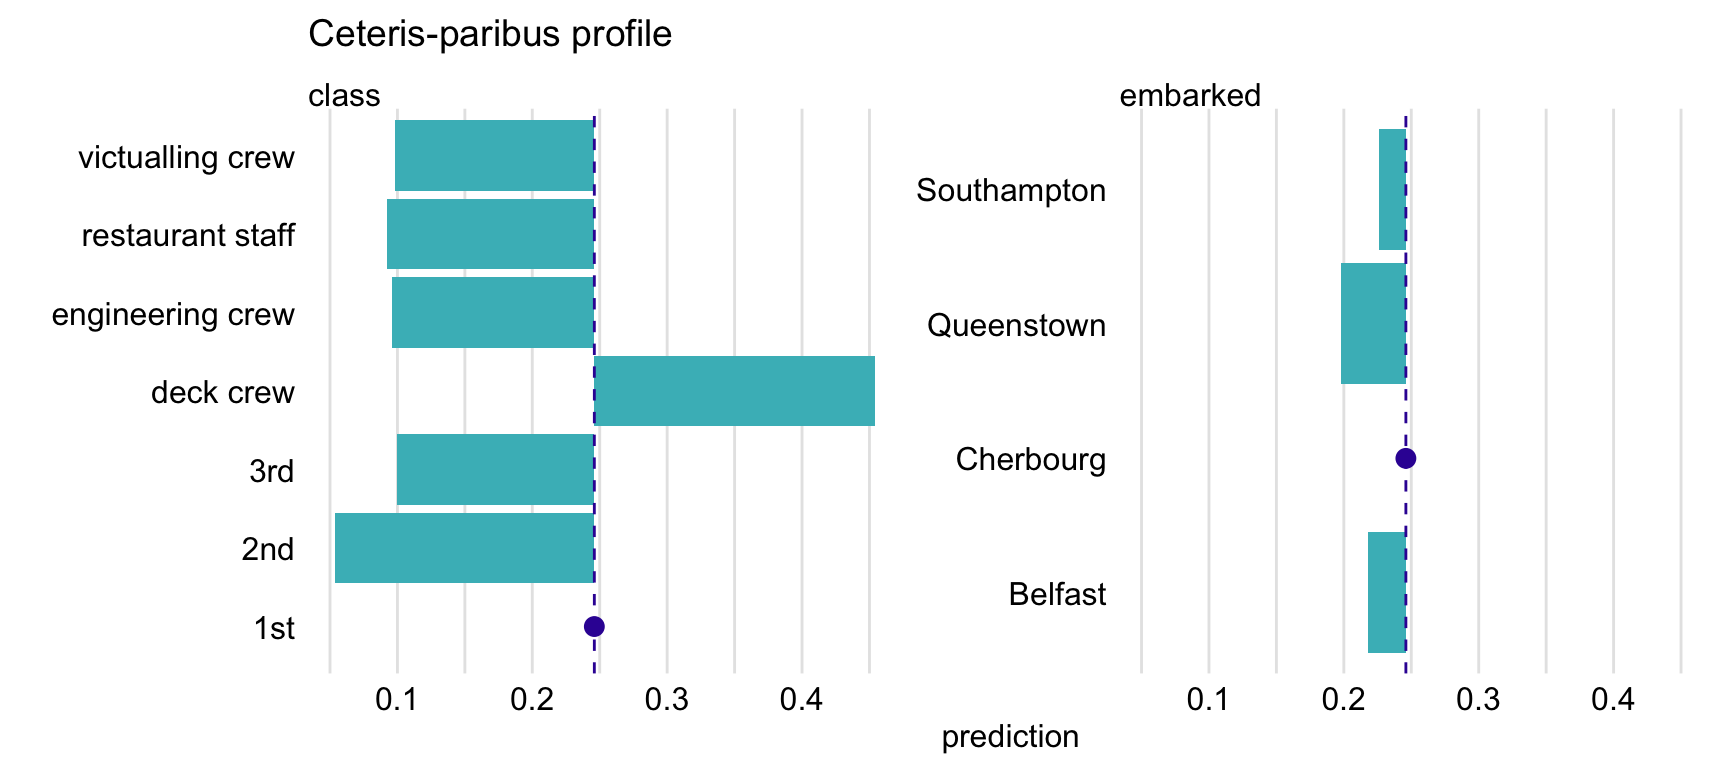 Ceteris-paribus profiles for variables class and embarked and the titanic_rf random forest model for the Titanic data. Dots indicate the values of the variables and of the prediction for Henry.